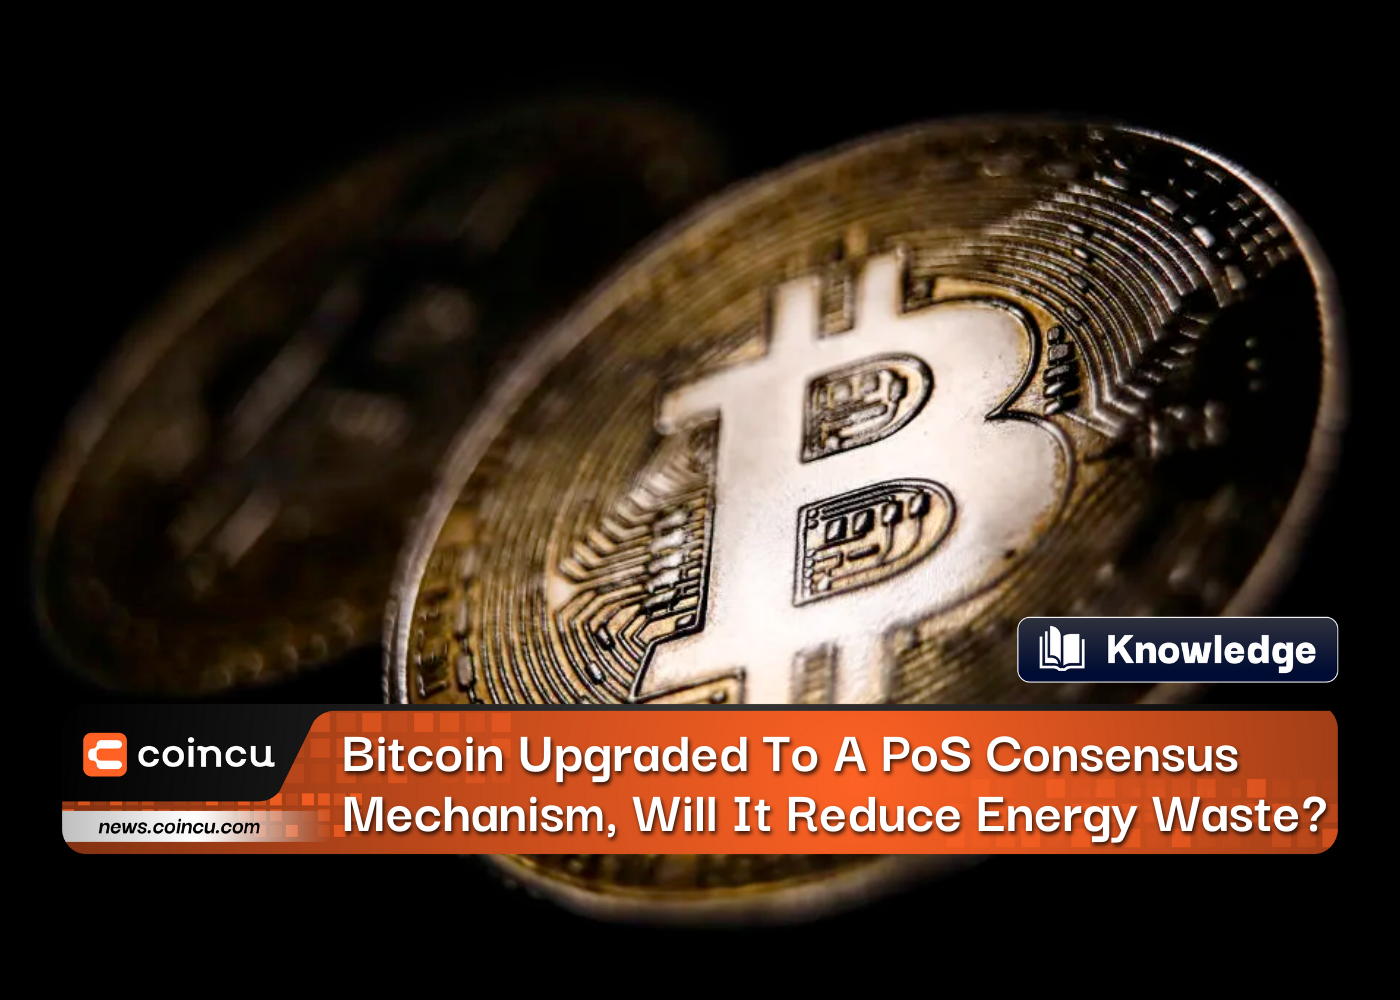 Bitcoin Upgraded To A PoS Consensus Mechanism, Will It Reduce Energy Waste?